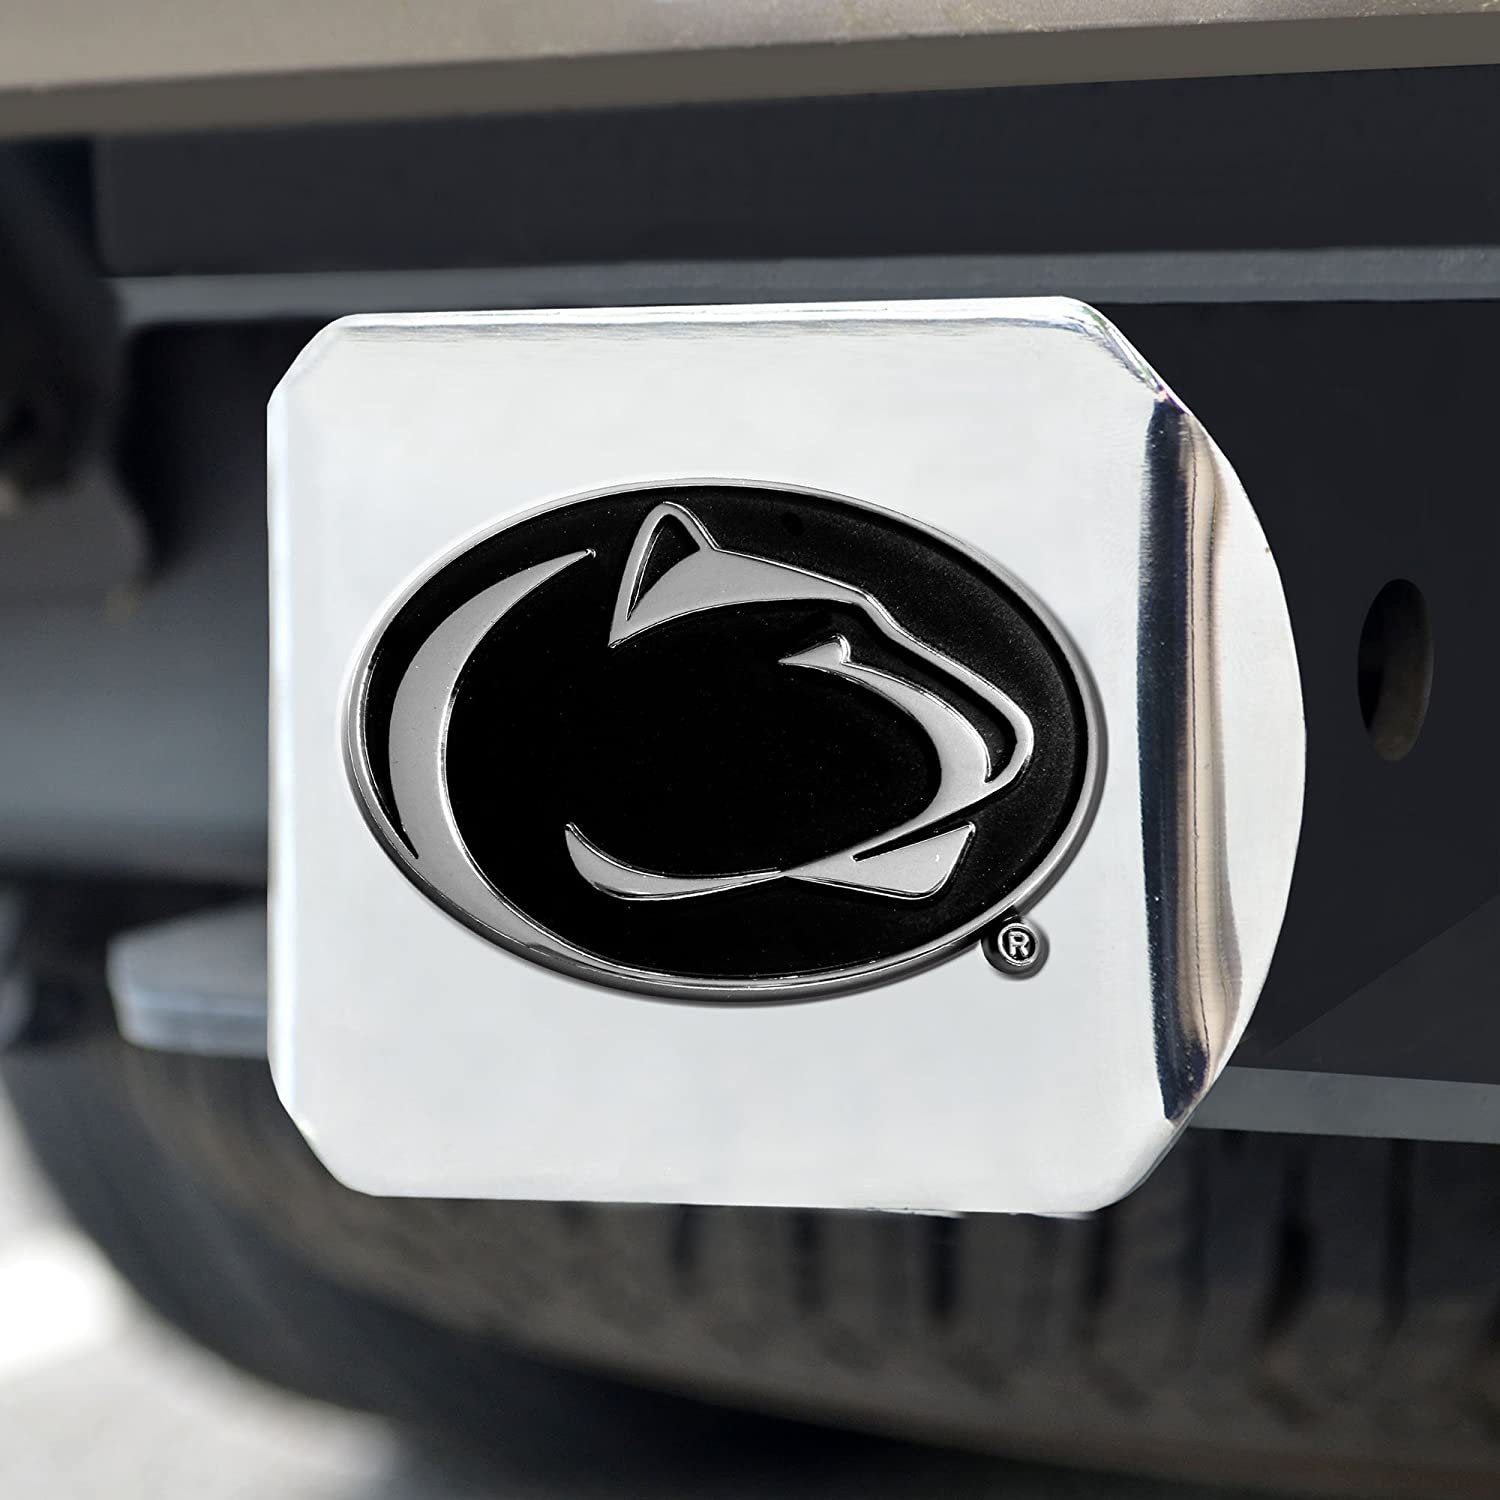 Penn State Nittany Lions Hitch Cover Solid Metal with Raised Chrome Metal Emblem 2" Square Type III University